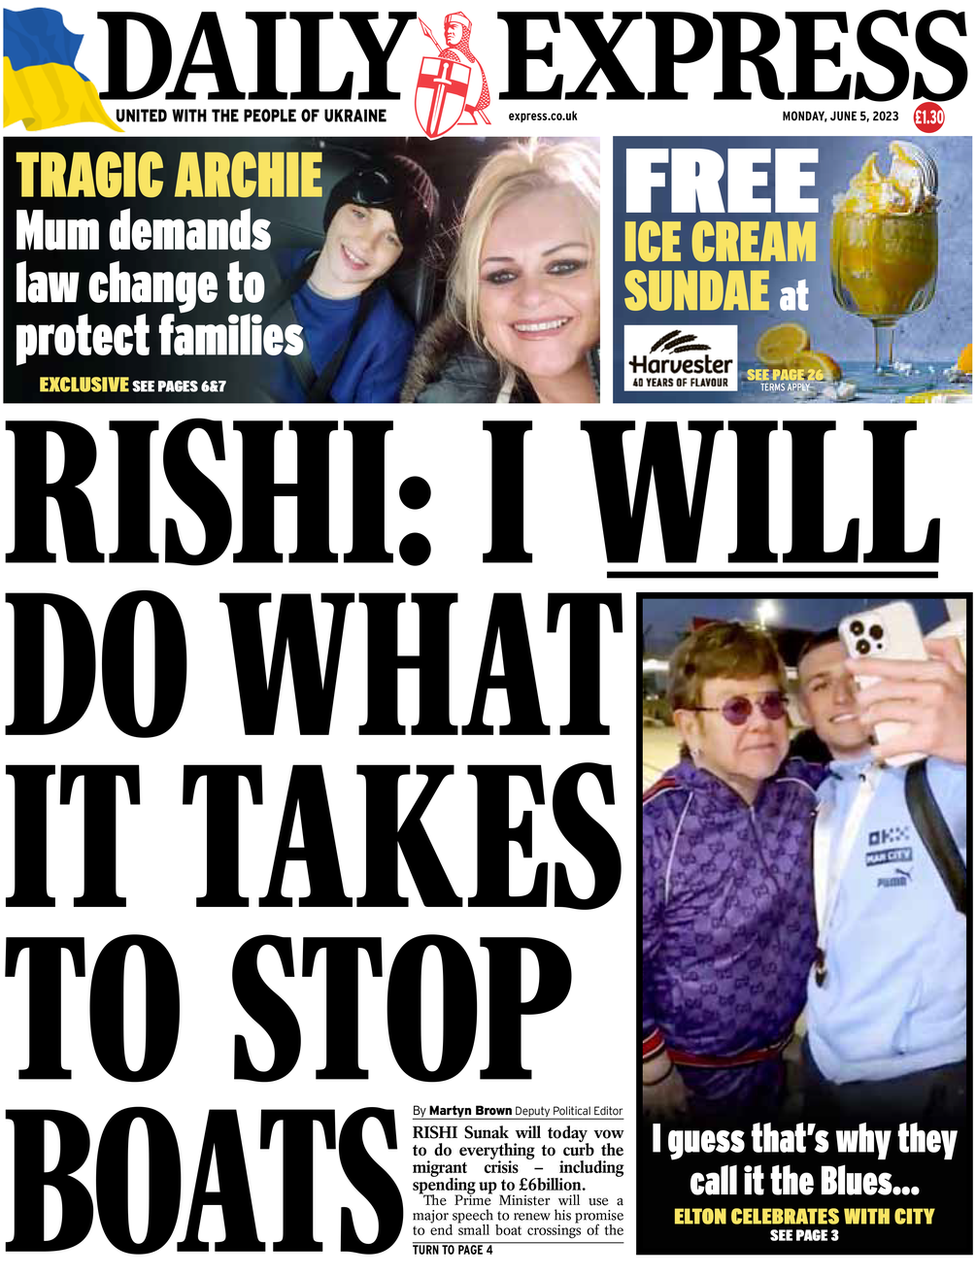 The front page of the Daily Express